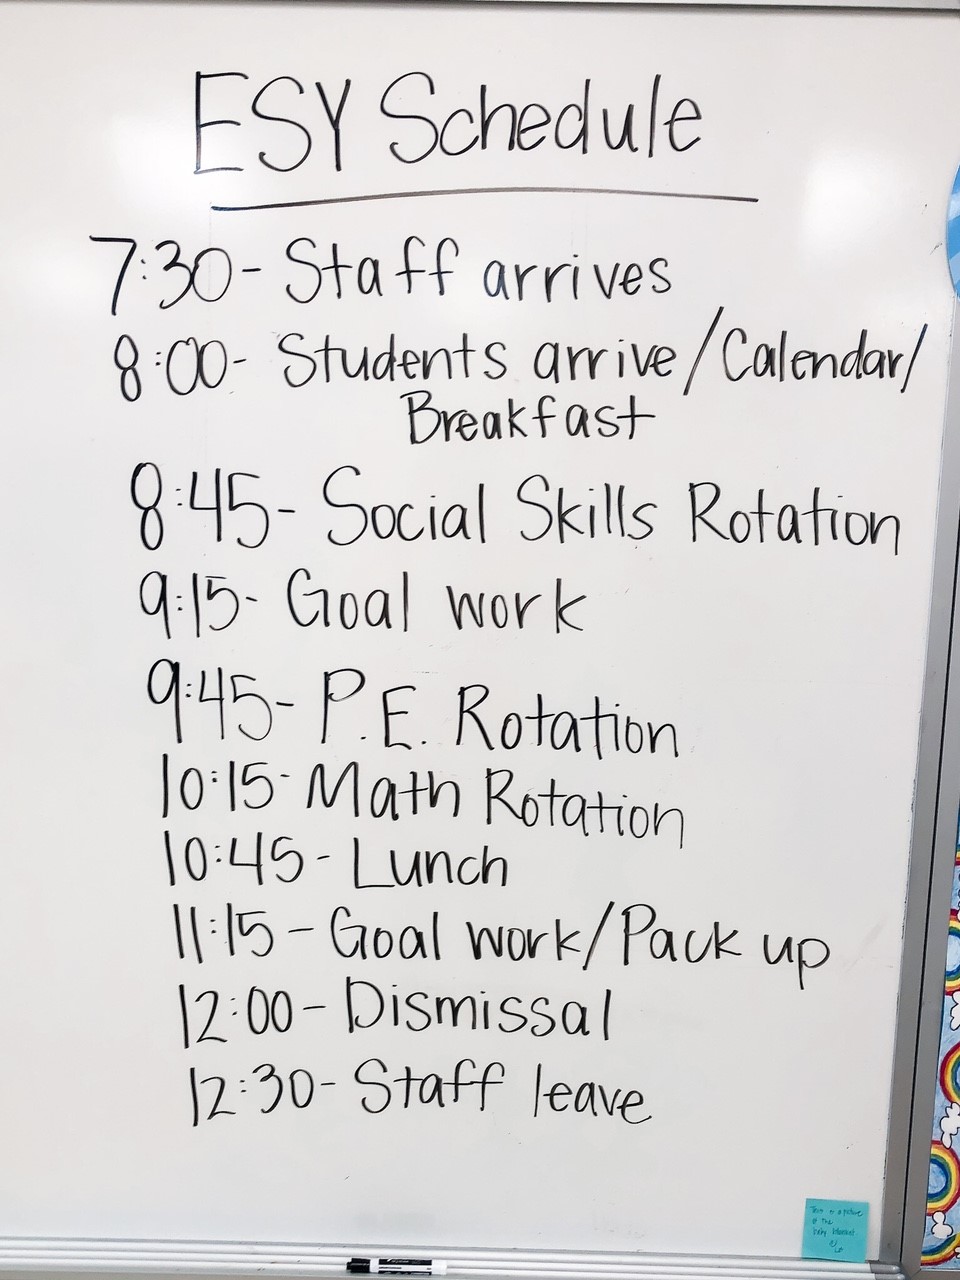 ESY schedule to keep track of rotations and other activities.